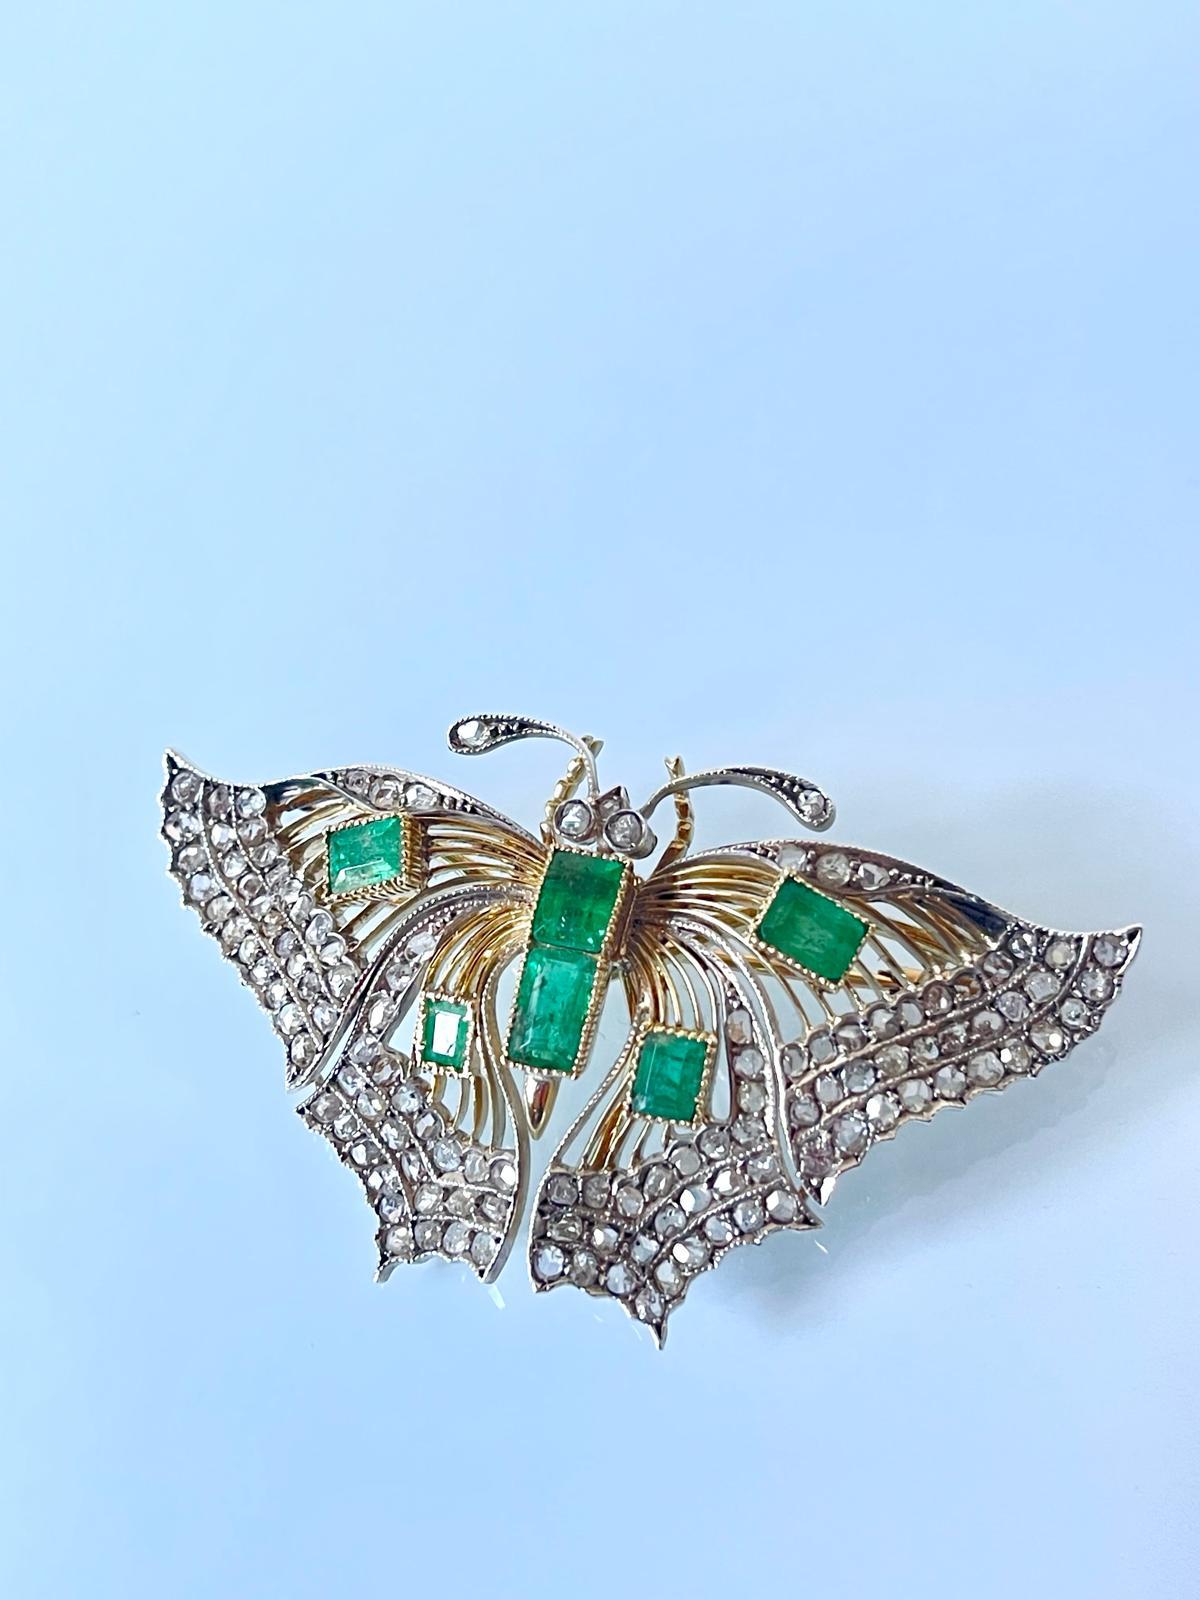 Fascinating late Victorian C 1890 butterfly brooch/pendant in 18K yellow gold and silver embellished by 6 natural emeralds and 235 rose cut diamonds.               
This nice antique brooch is large in size, measuring 3.5 x 6.5 cm, it is in a very